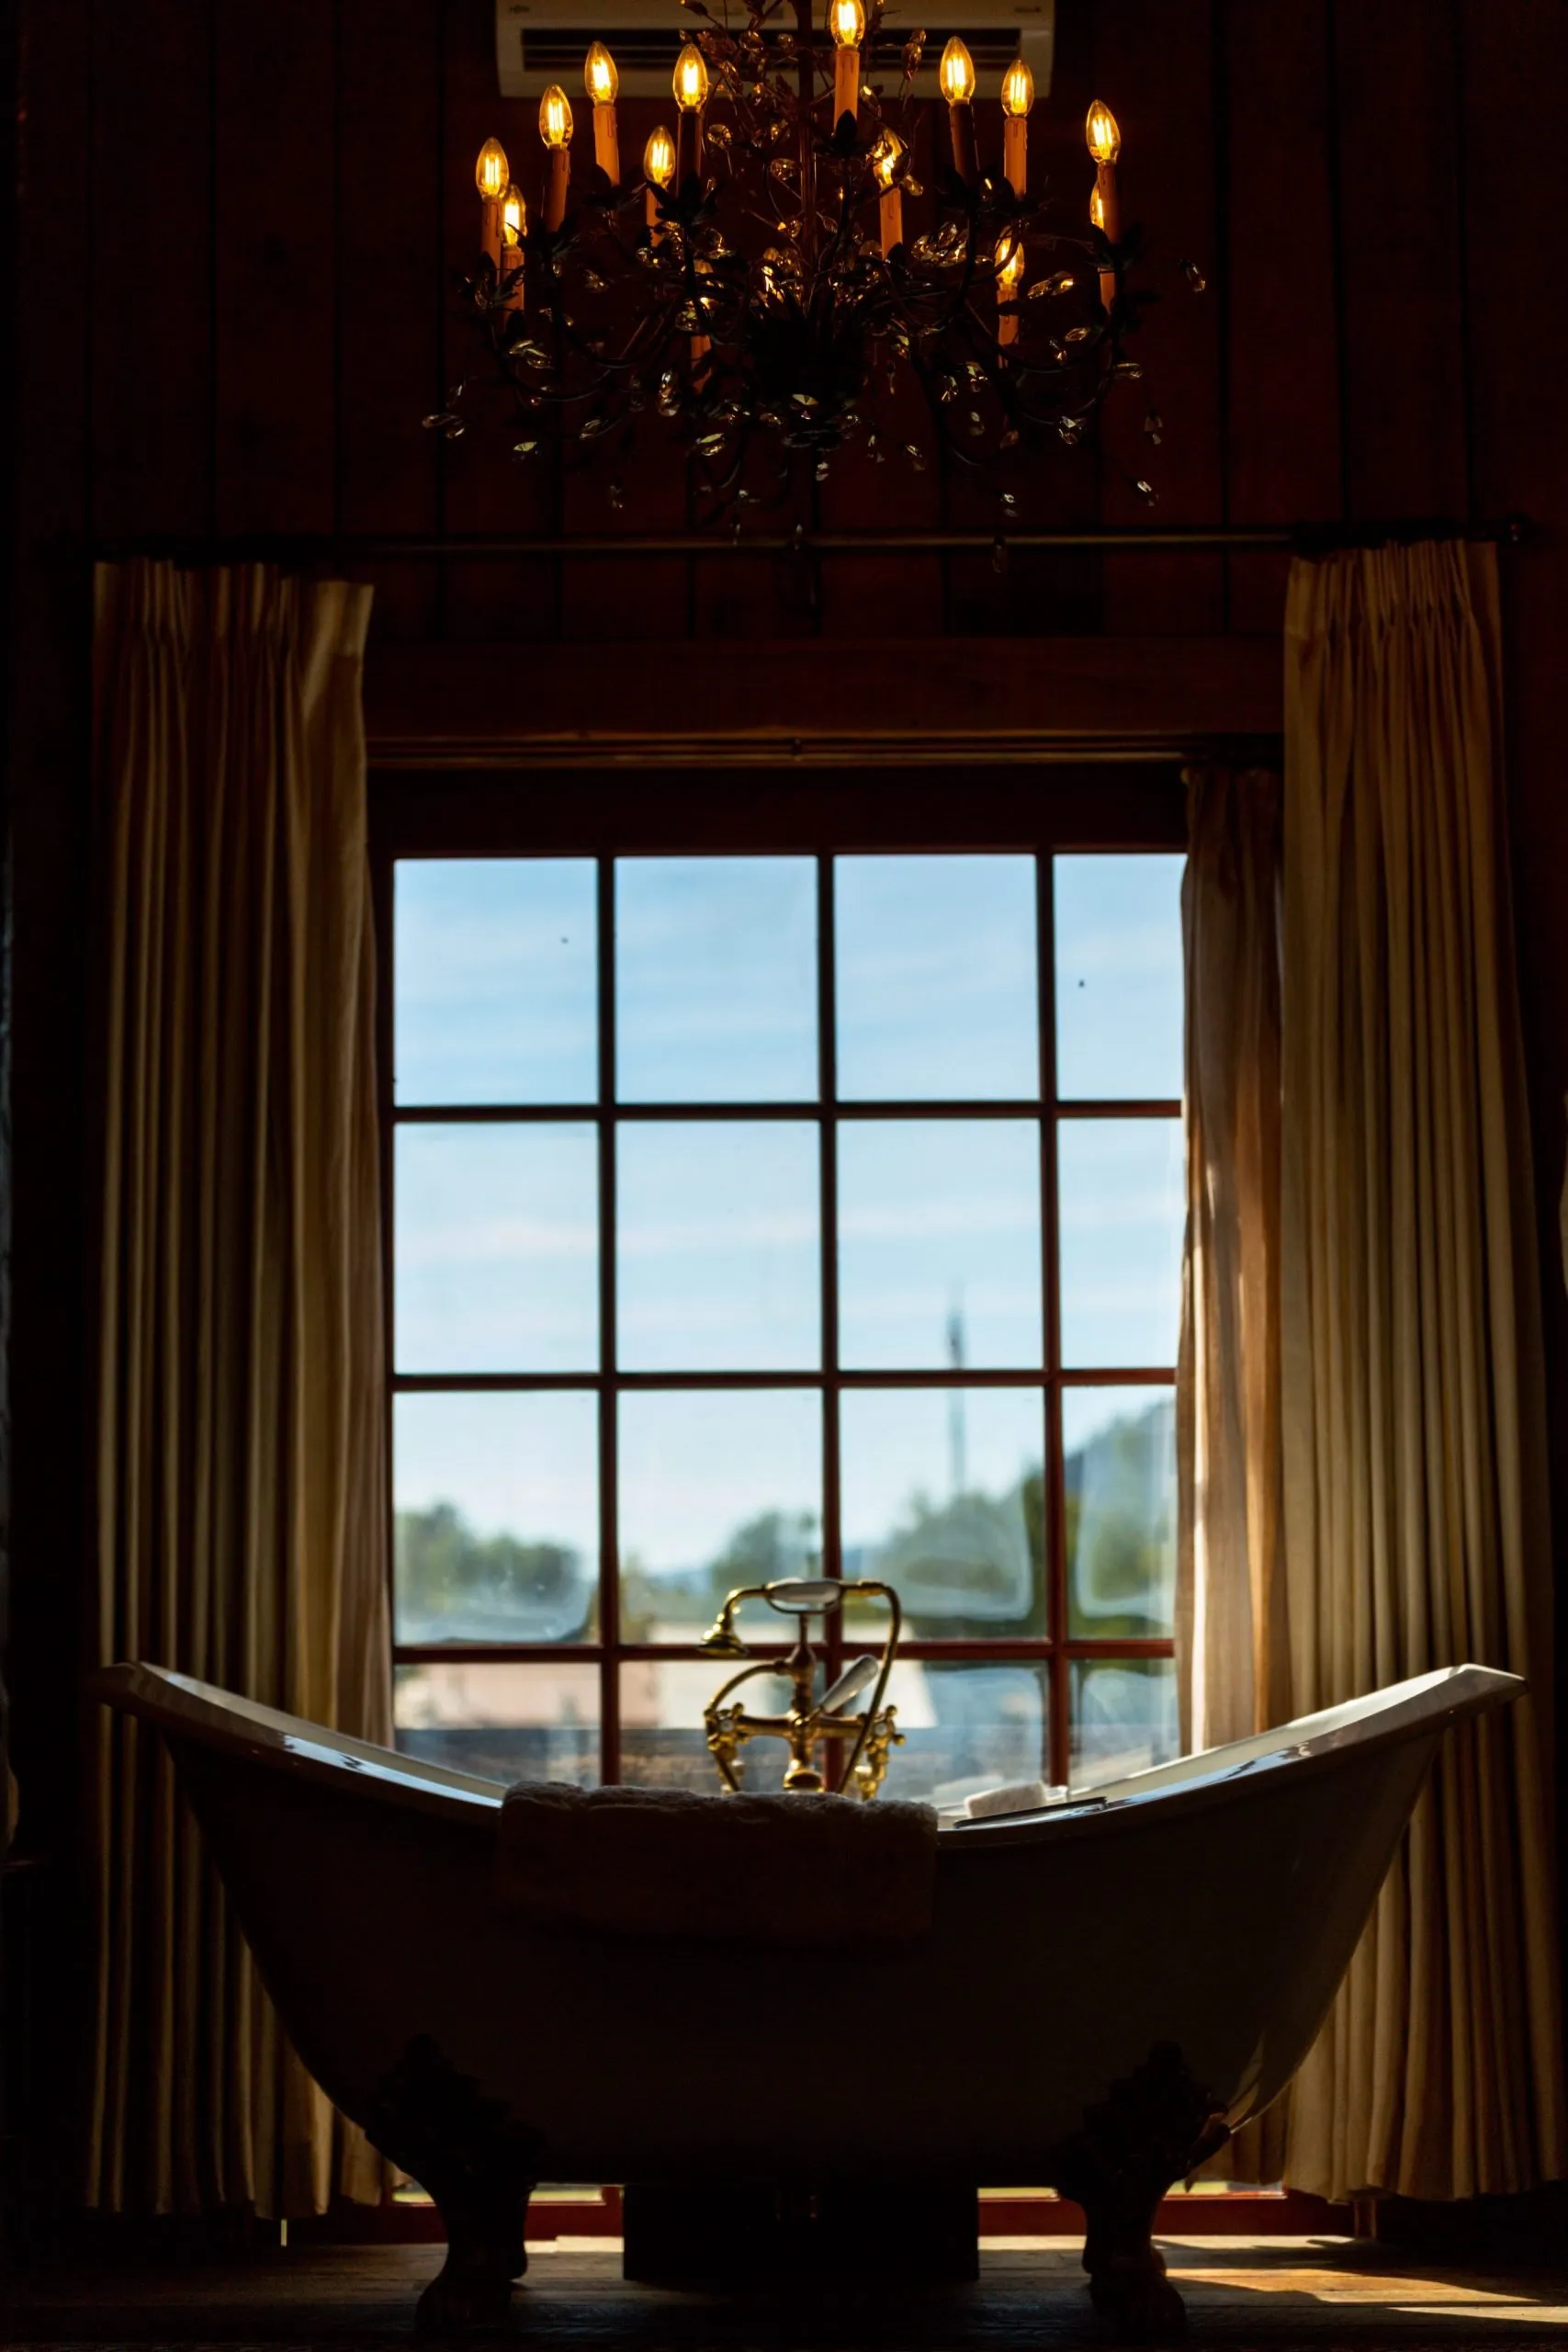 A luxurious bath tub facing a window with open curtains to the sides